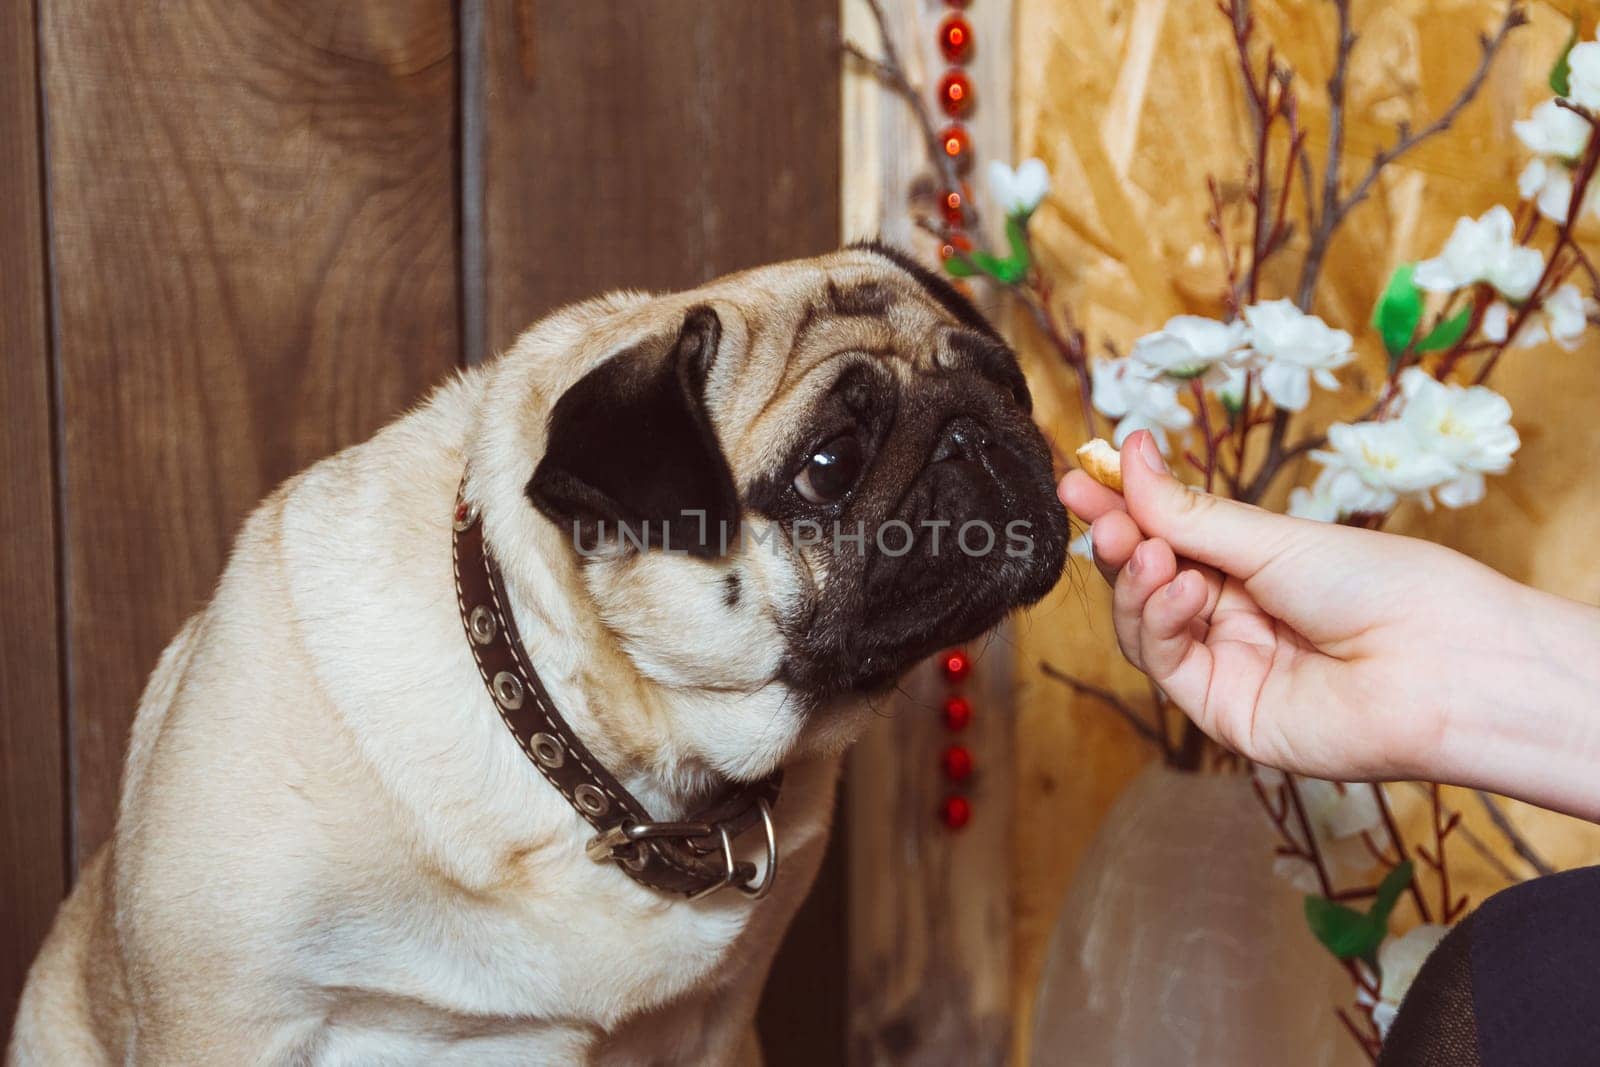 A pug dog sniffs a bagel in a woman's hands in close-up by ElenaNEL